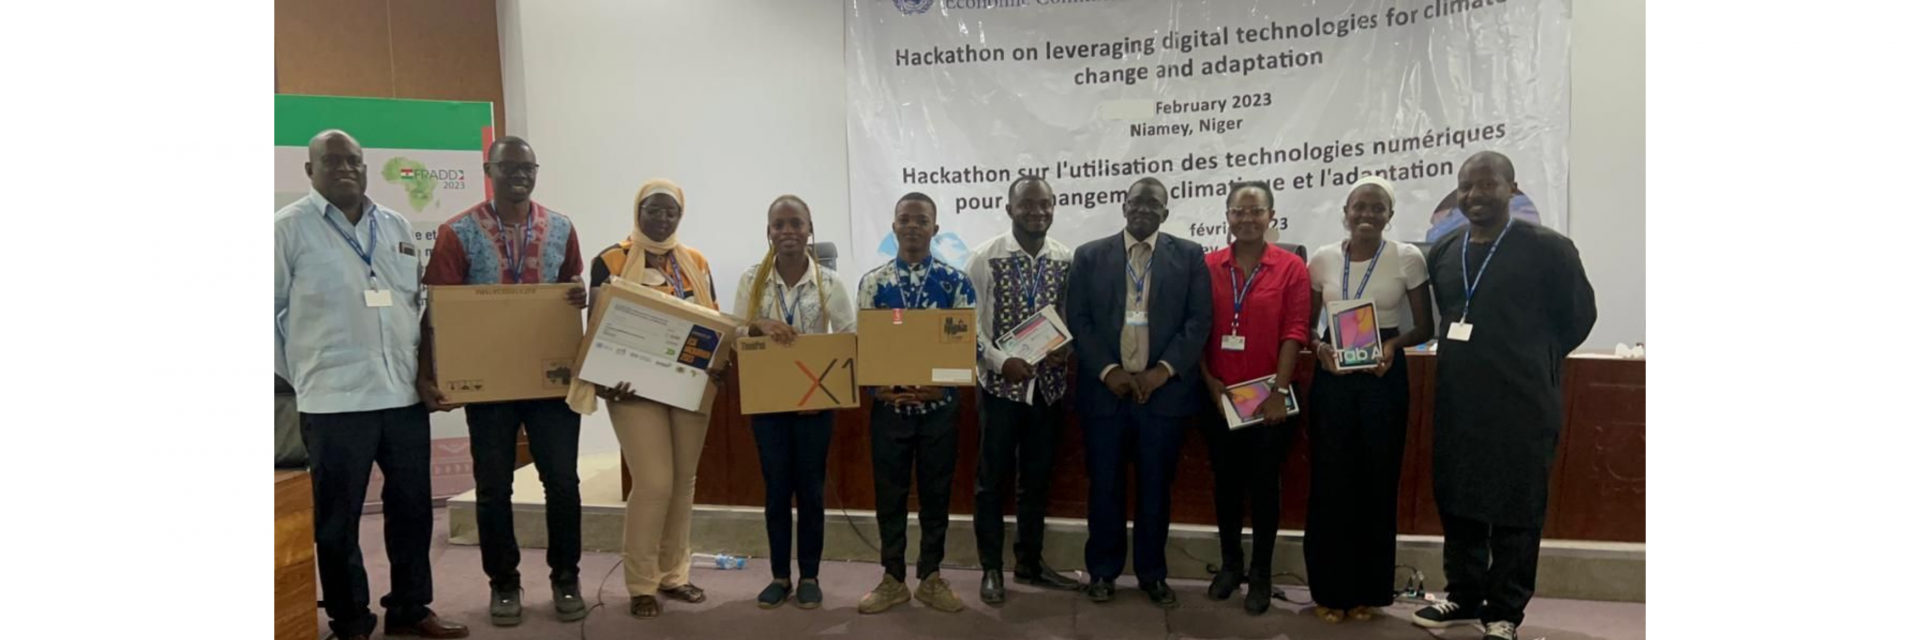 ECA hosts Hackathon to Leverage Digital Technologies for Climate Resilience and Adaptation in Niamey, Niger